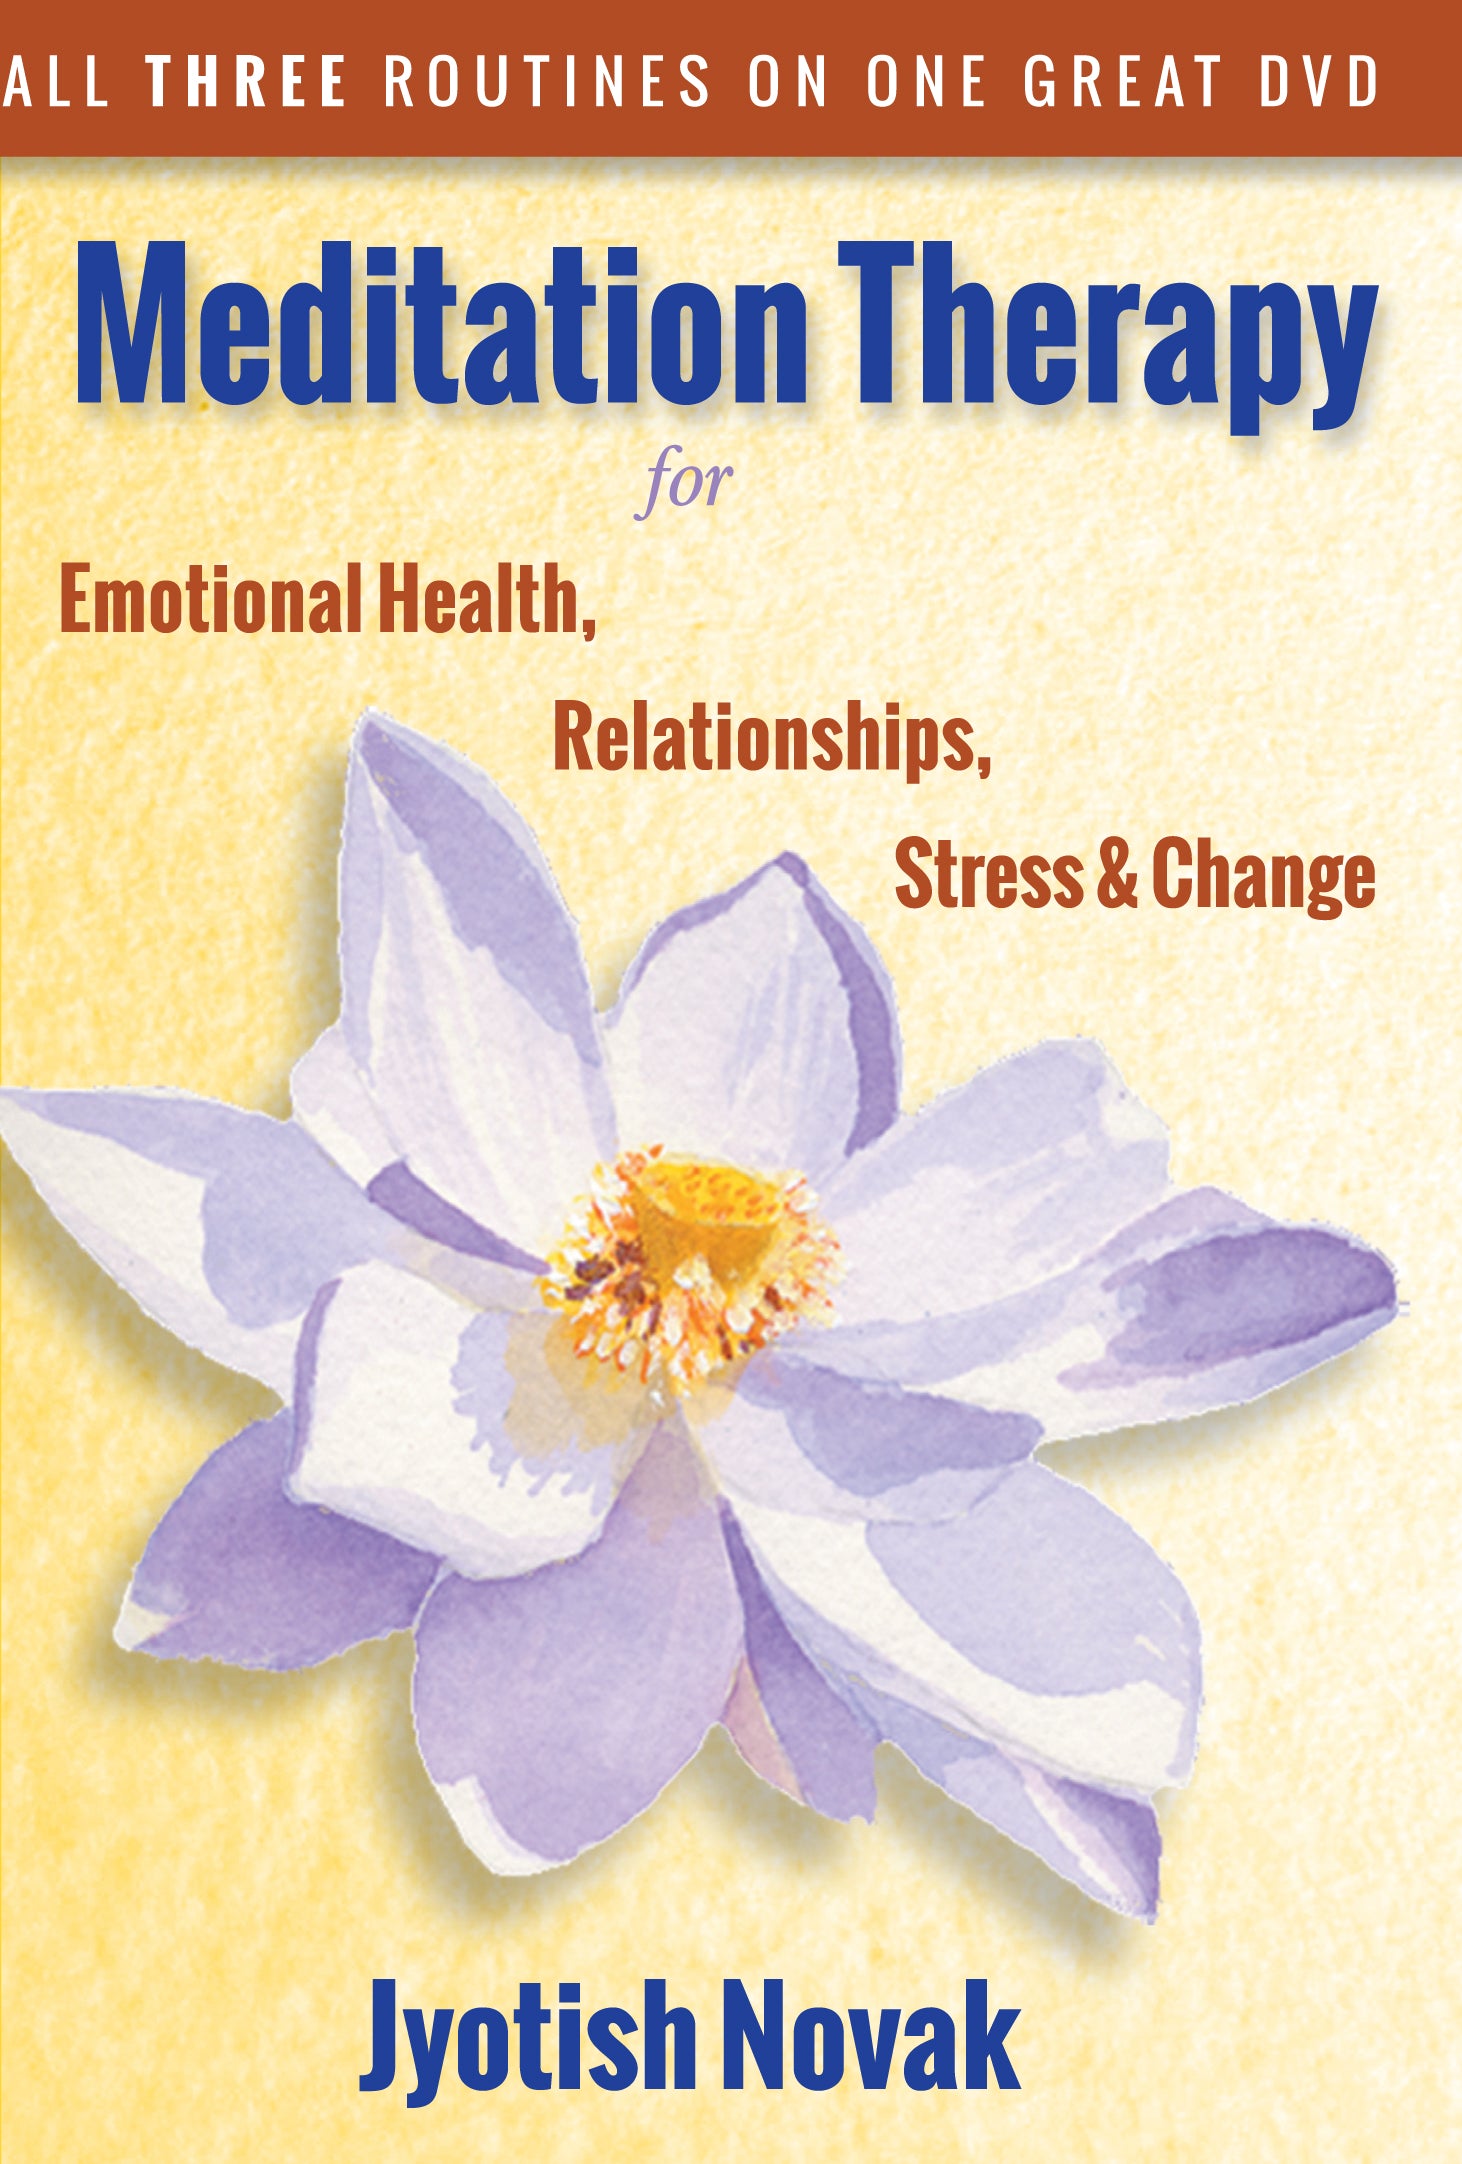 Meditation Therapy  DVD